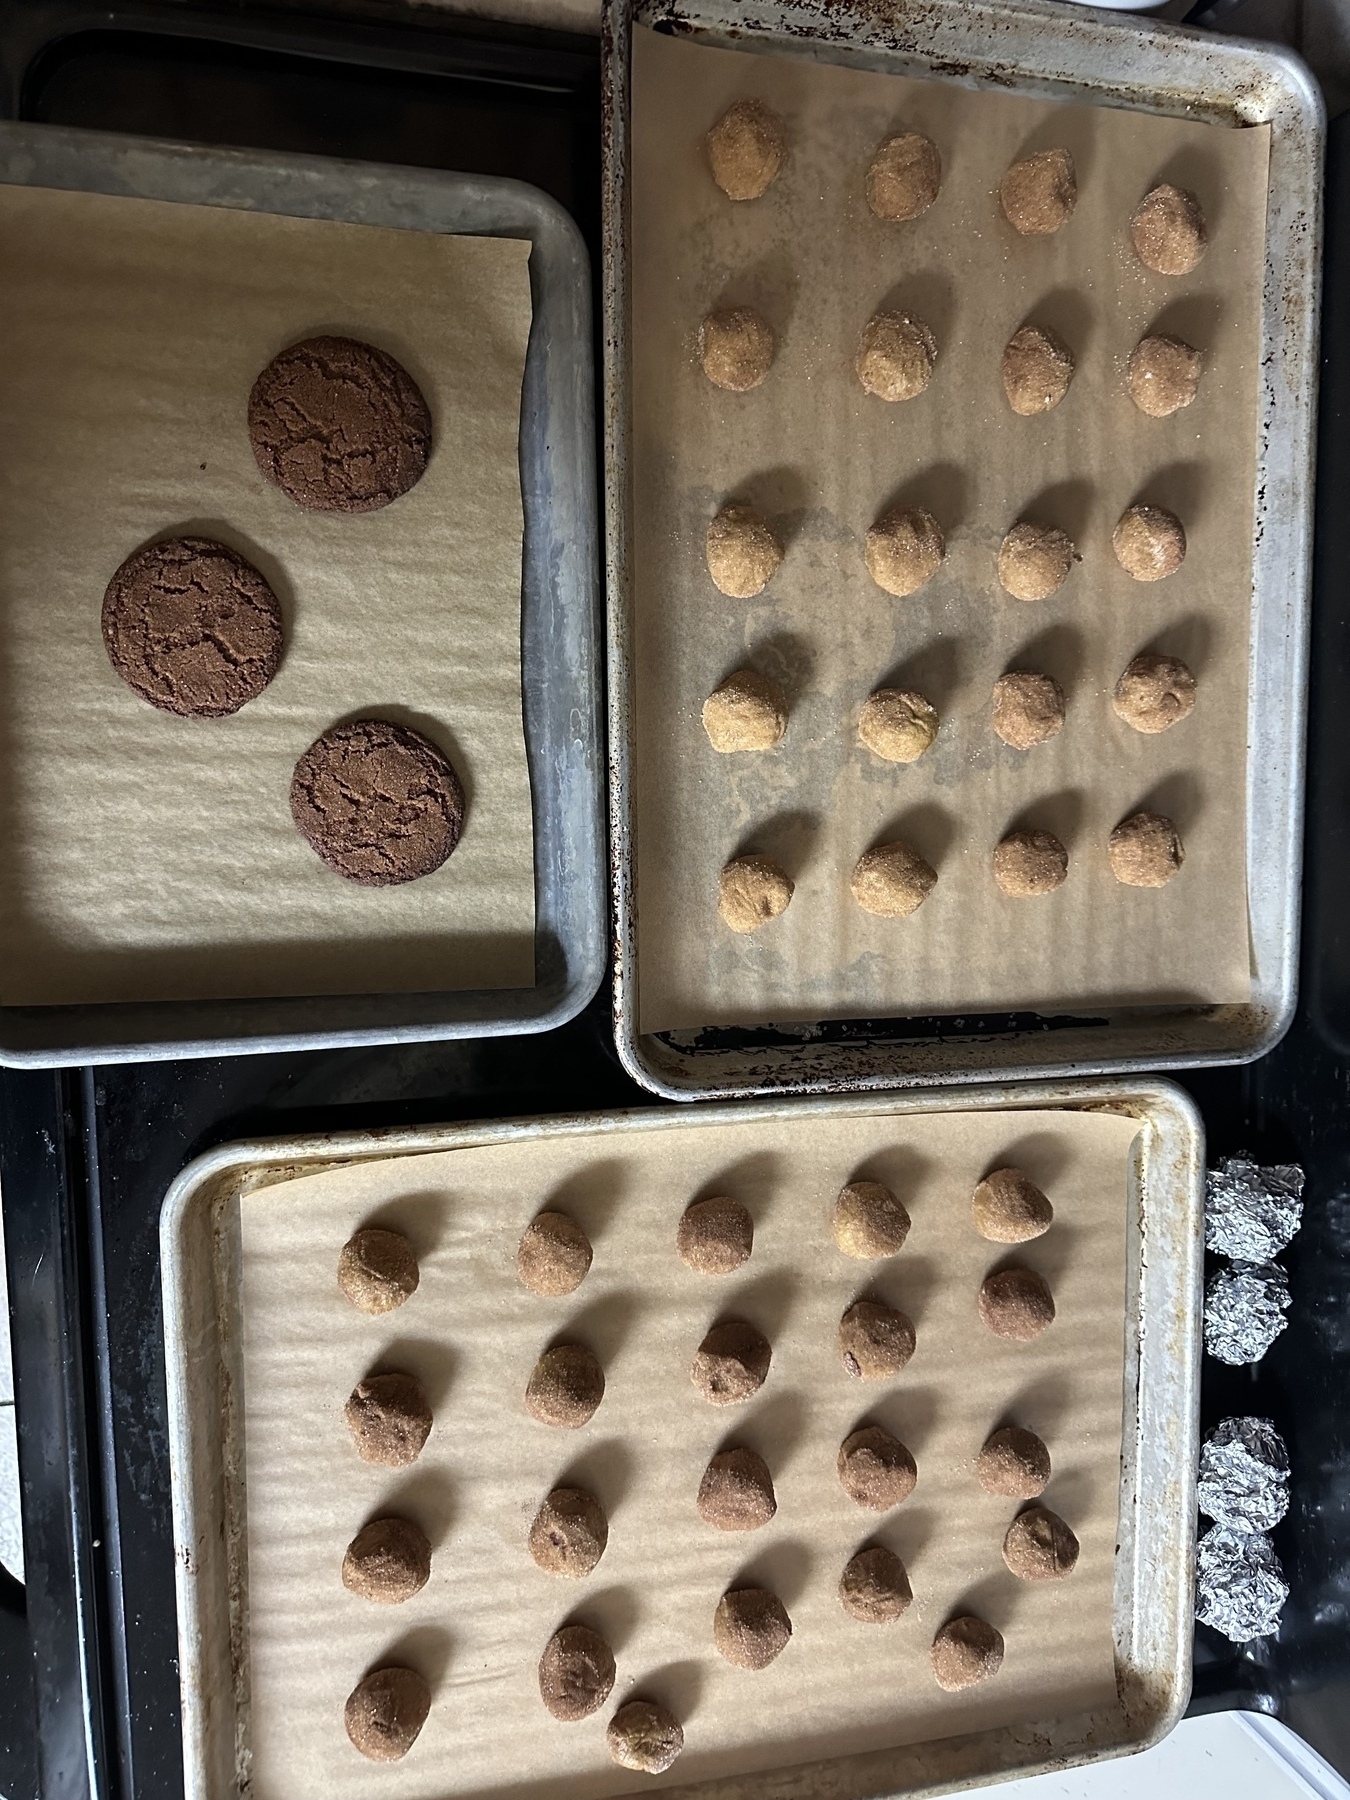 One small tray of ginger snap cookies and two larger trays of uncooked dough ready for the freezer